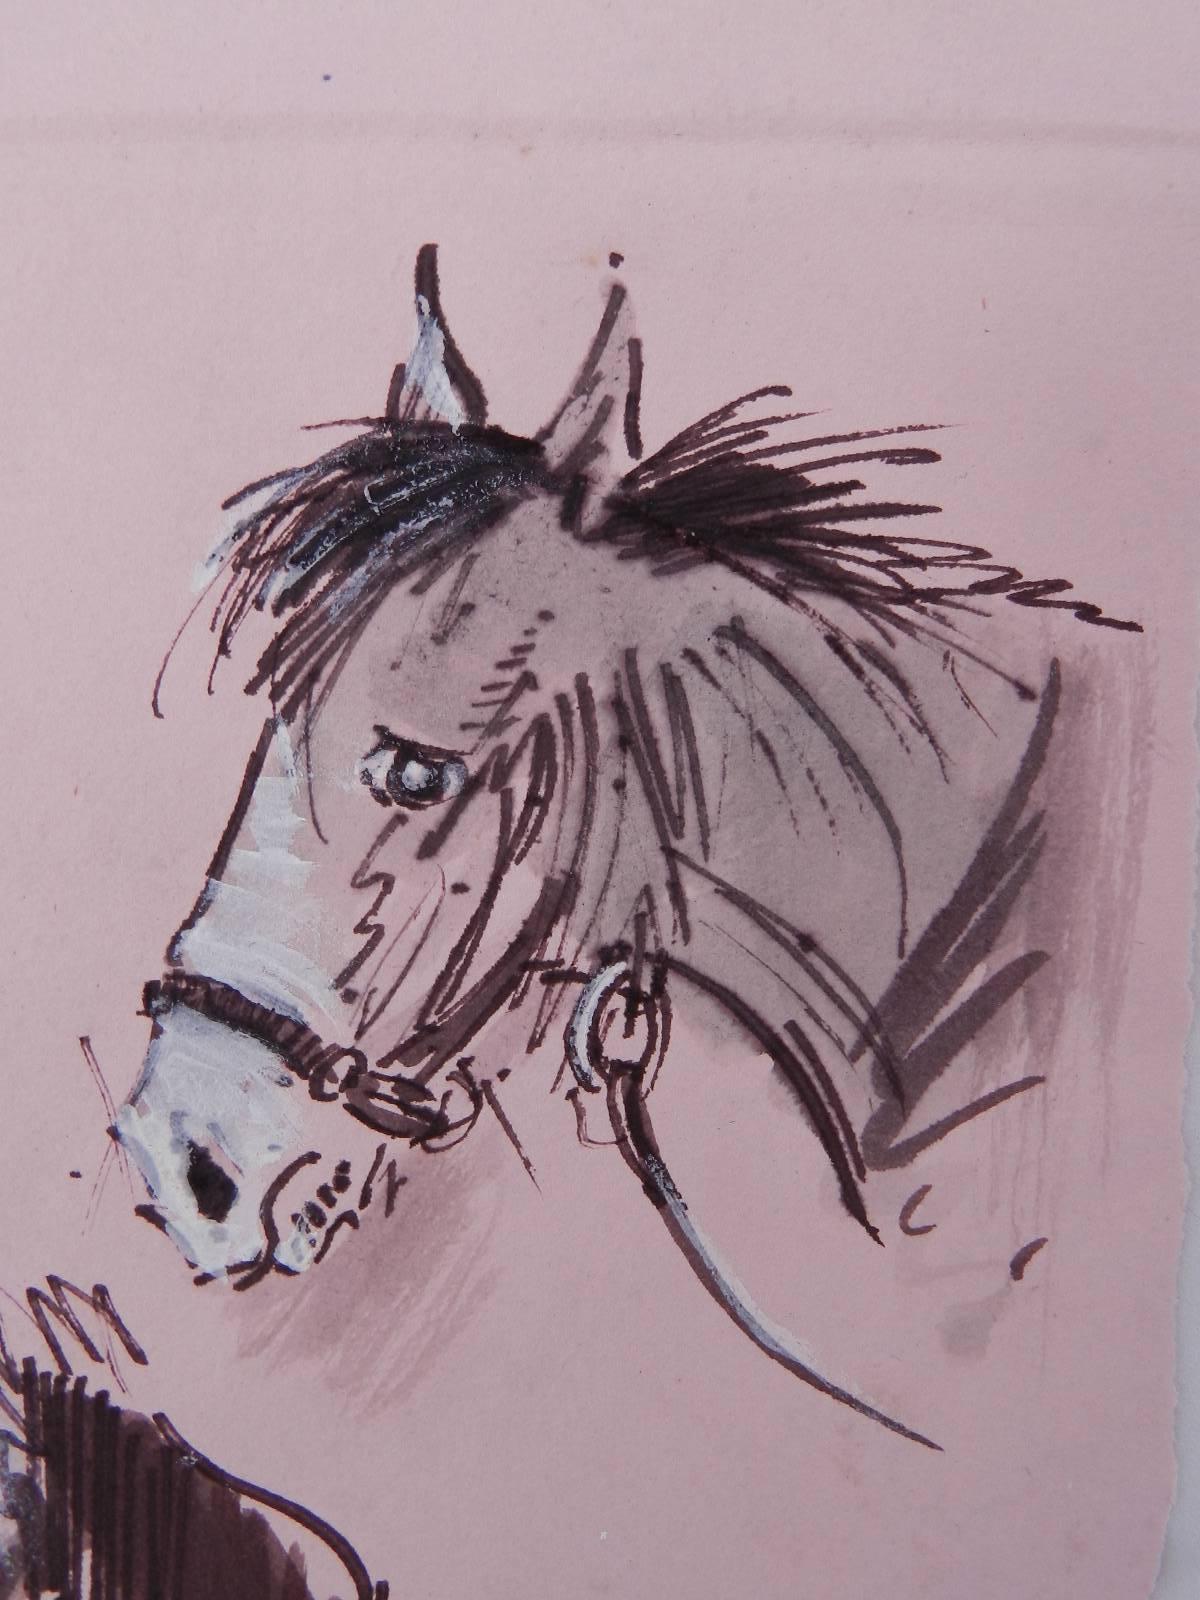 Study of Horses painting in Sepia tones original watercolor circa 1950-1960
By UK artist Peter Hobbs 1930-1994
Signed by the artist 
This British artist was a professional Sports Caricaturist especially well-known for his series of golf caricatures